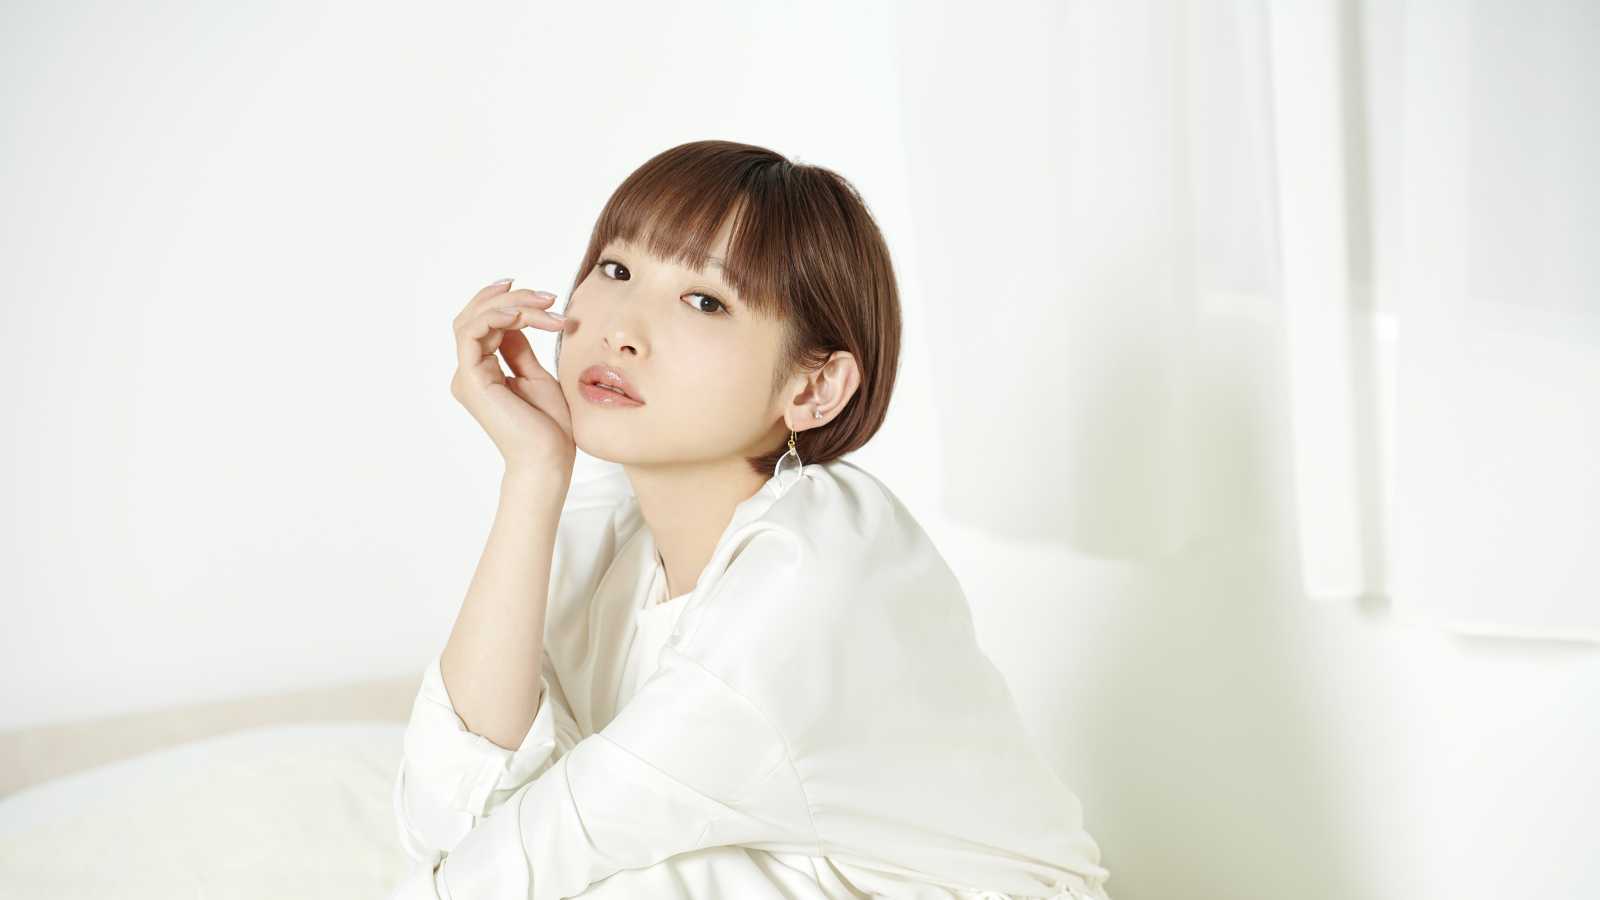 New Single from Yoshino Nanjo © NBCUniversal Entertainment Japan. All rights reserved.